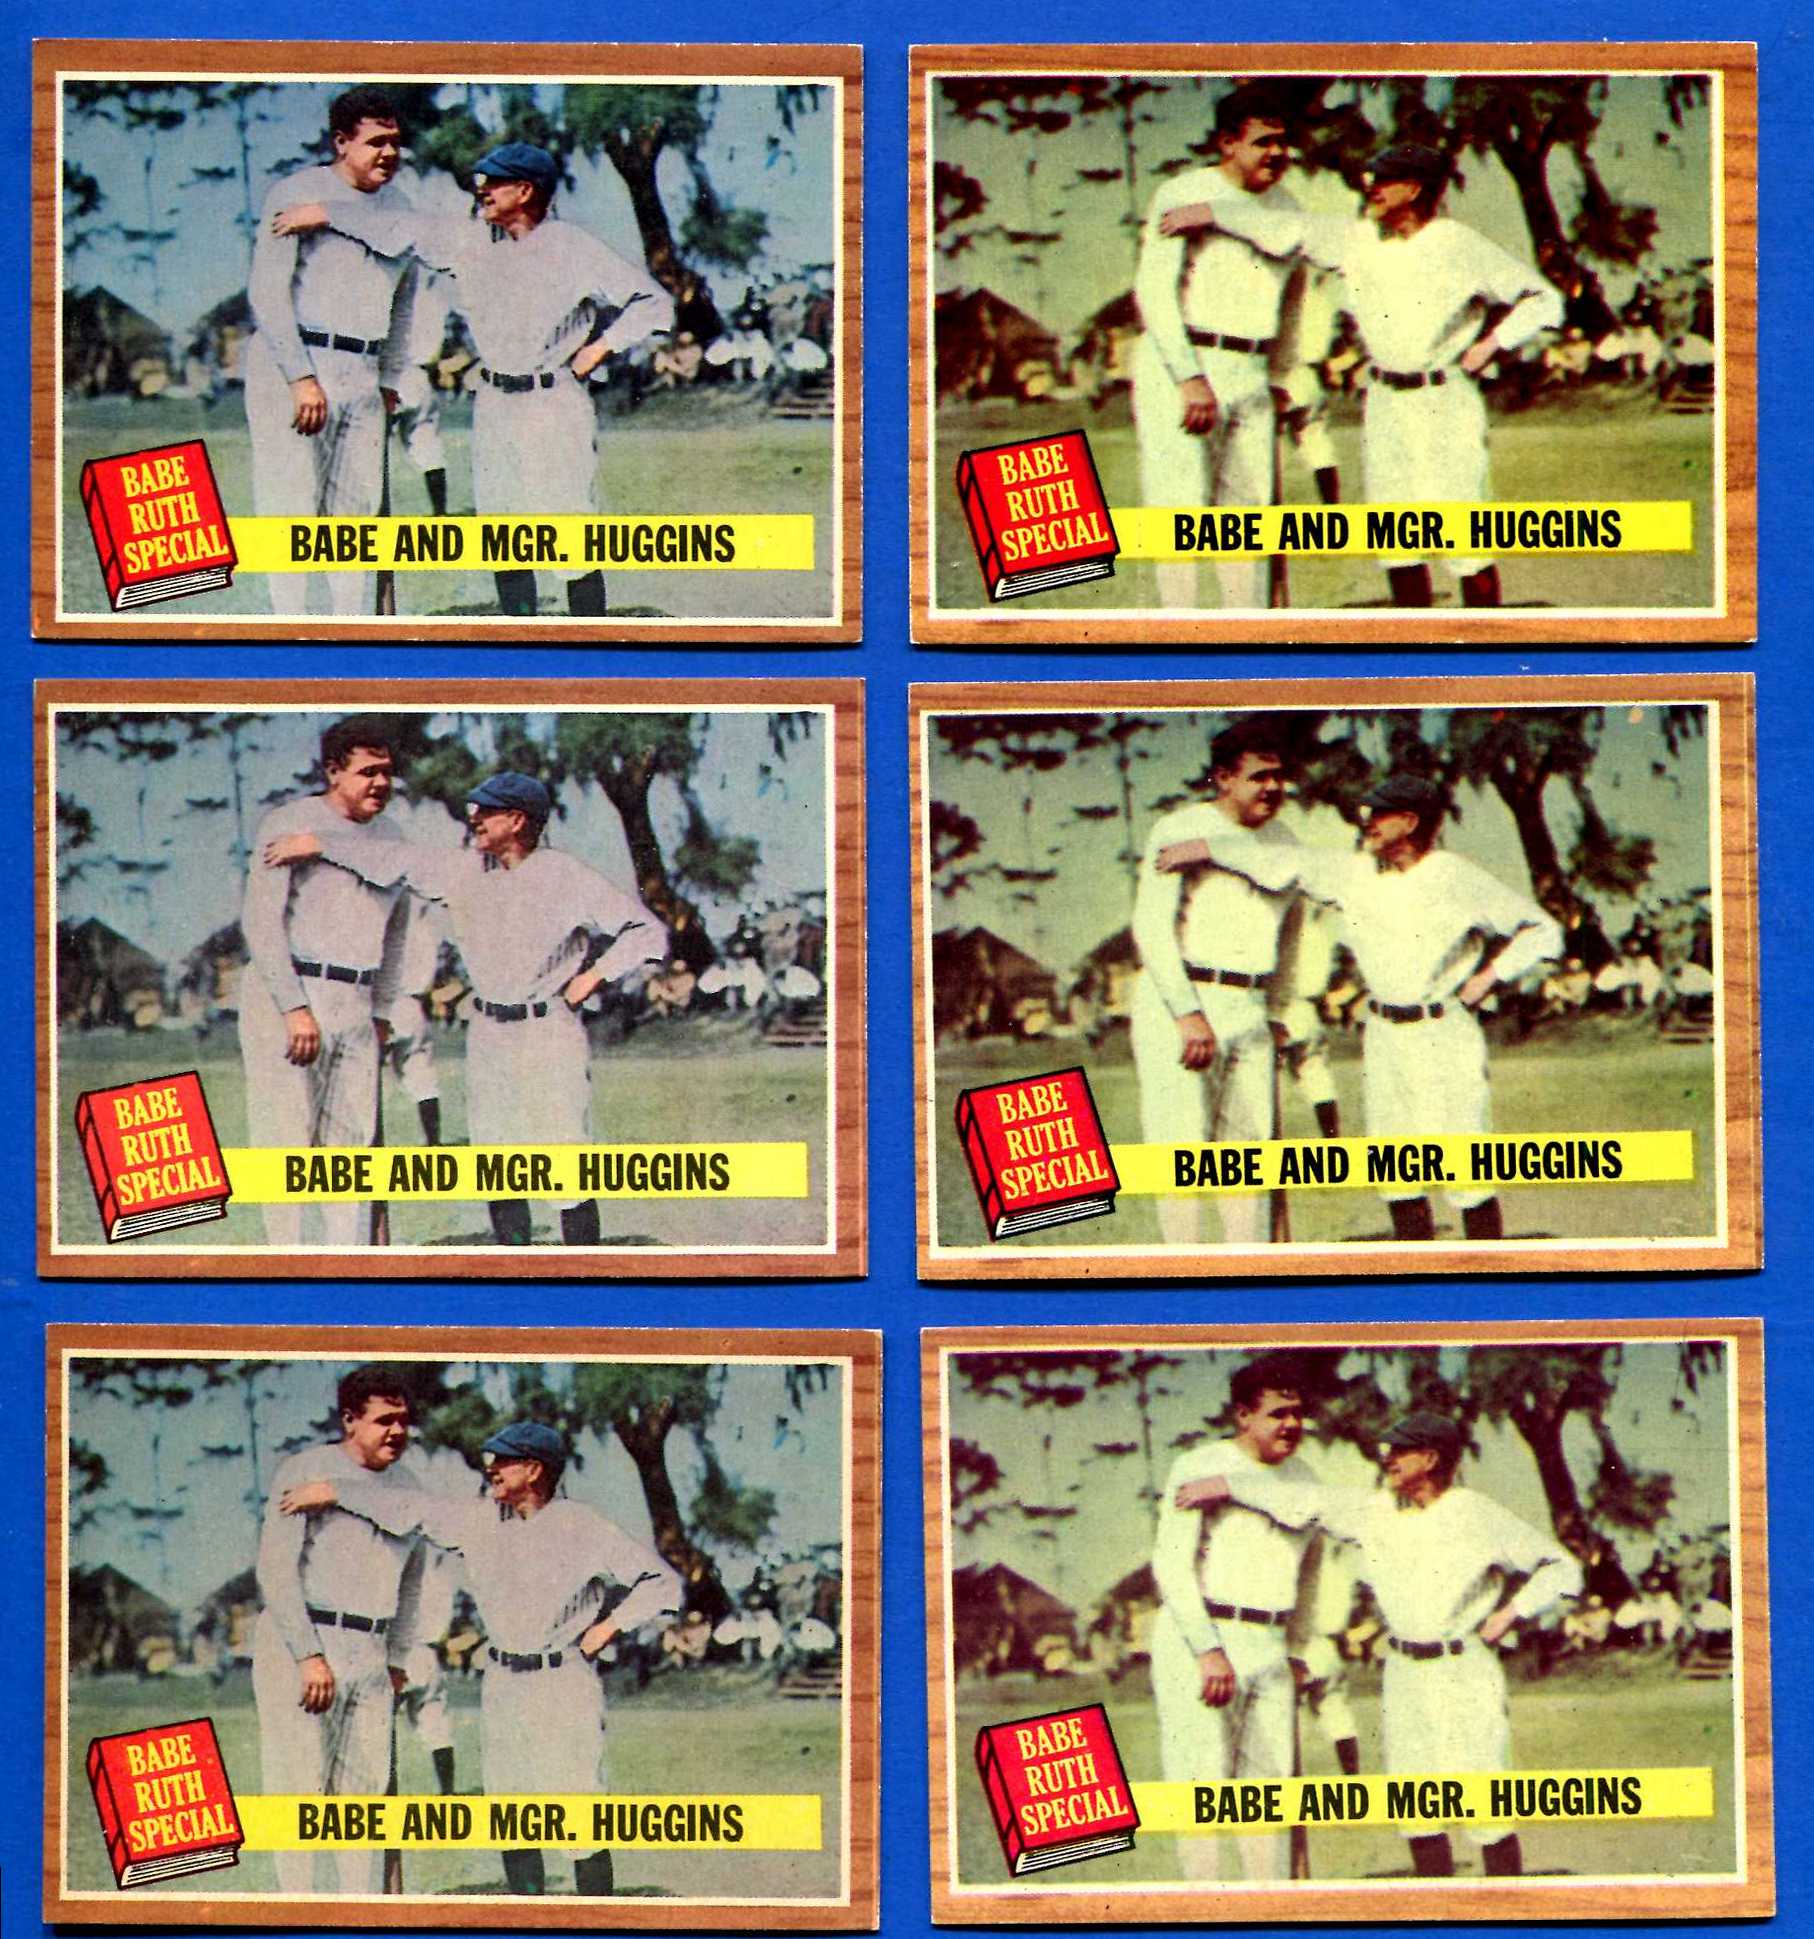 1962 Topps #137 Babe Ruth Special #3 (with Miller Huggins) (Yankees) Baseball cards value